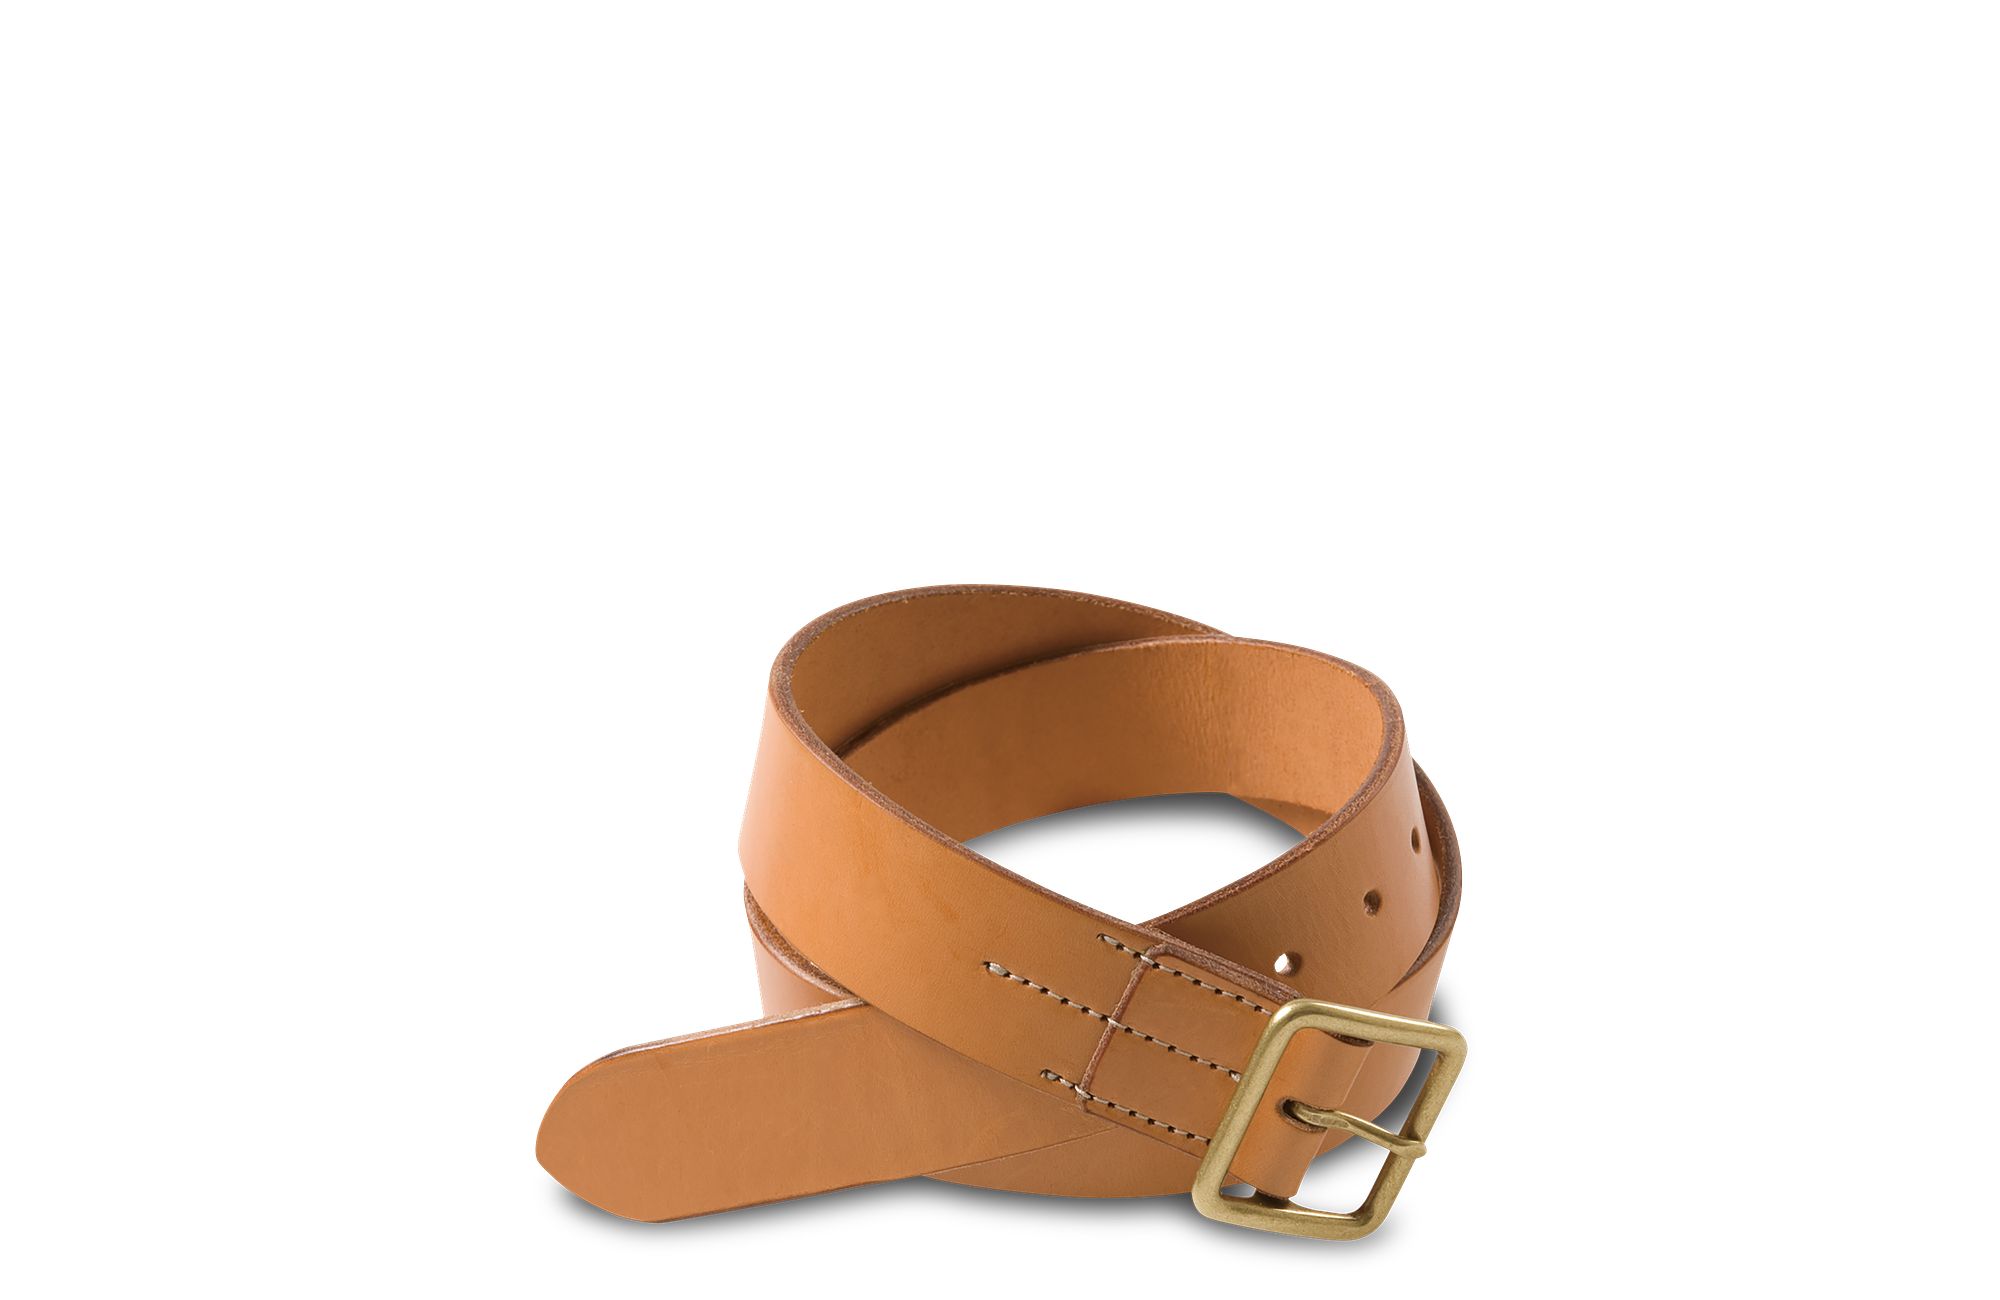 Vegetable Tanned Leather Tooling Strap Sides